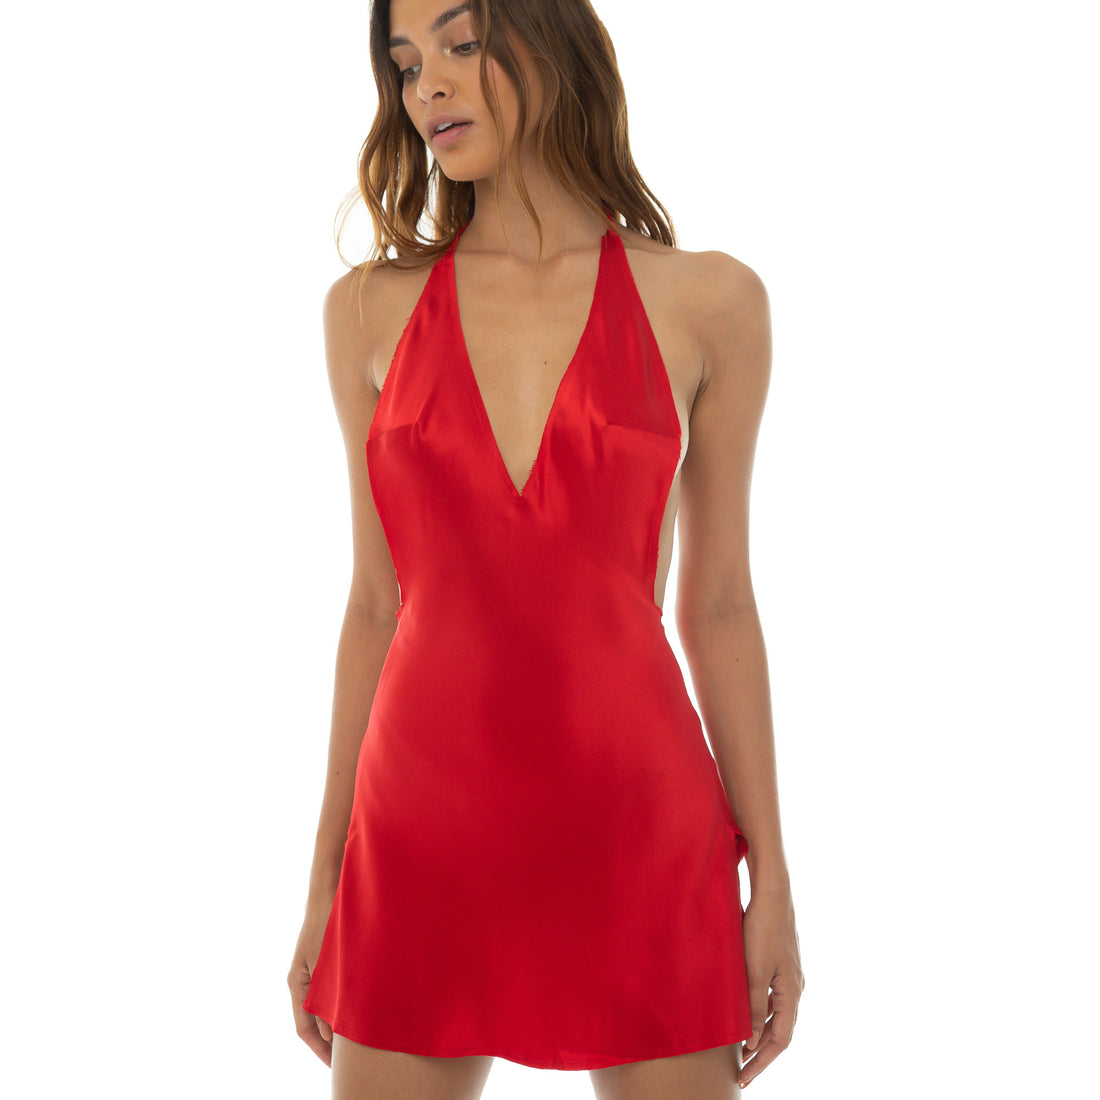 Are You Am I - Atla Dress **red